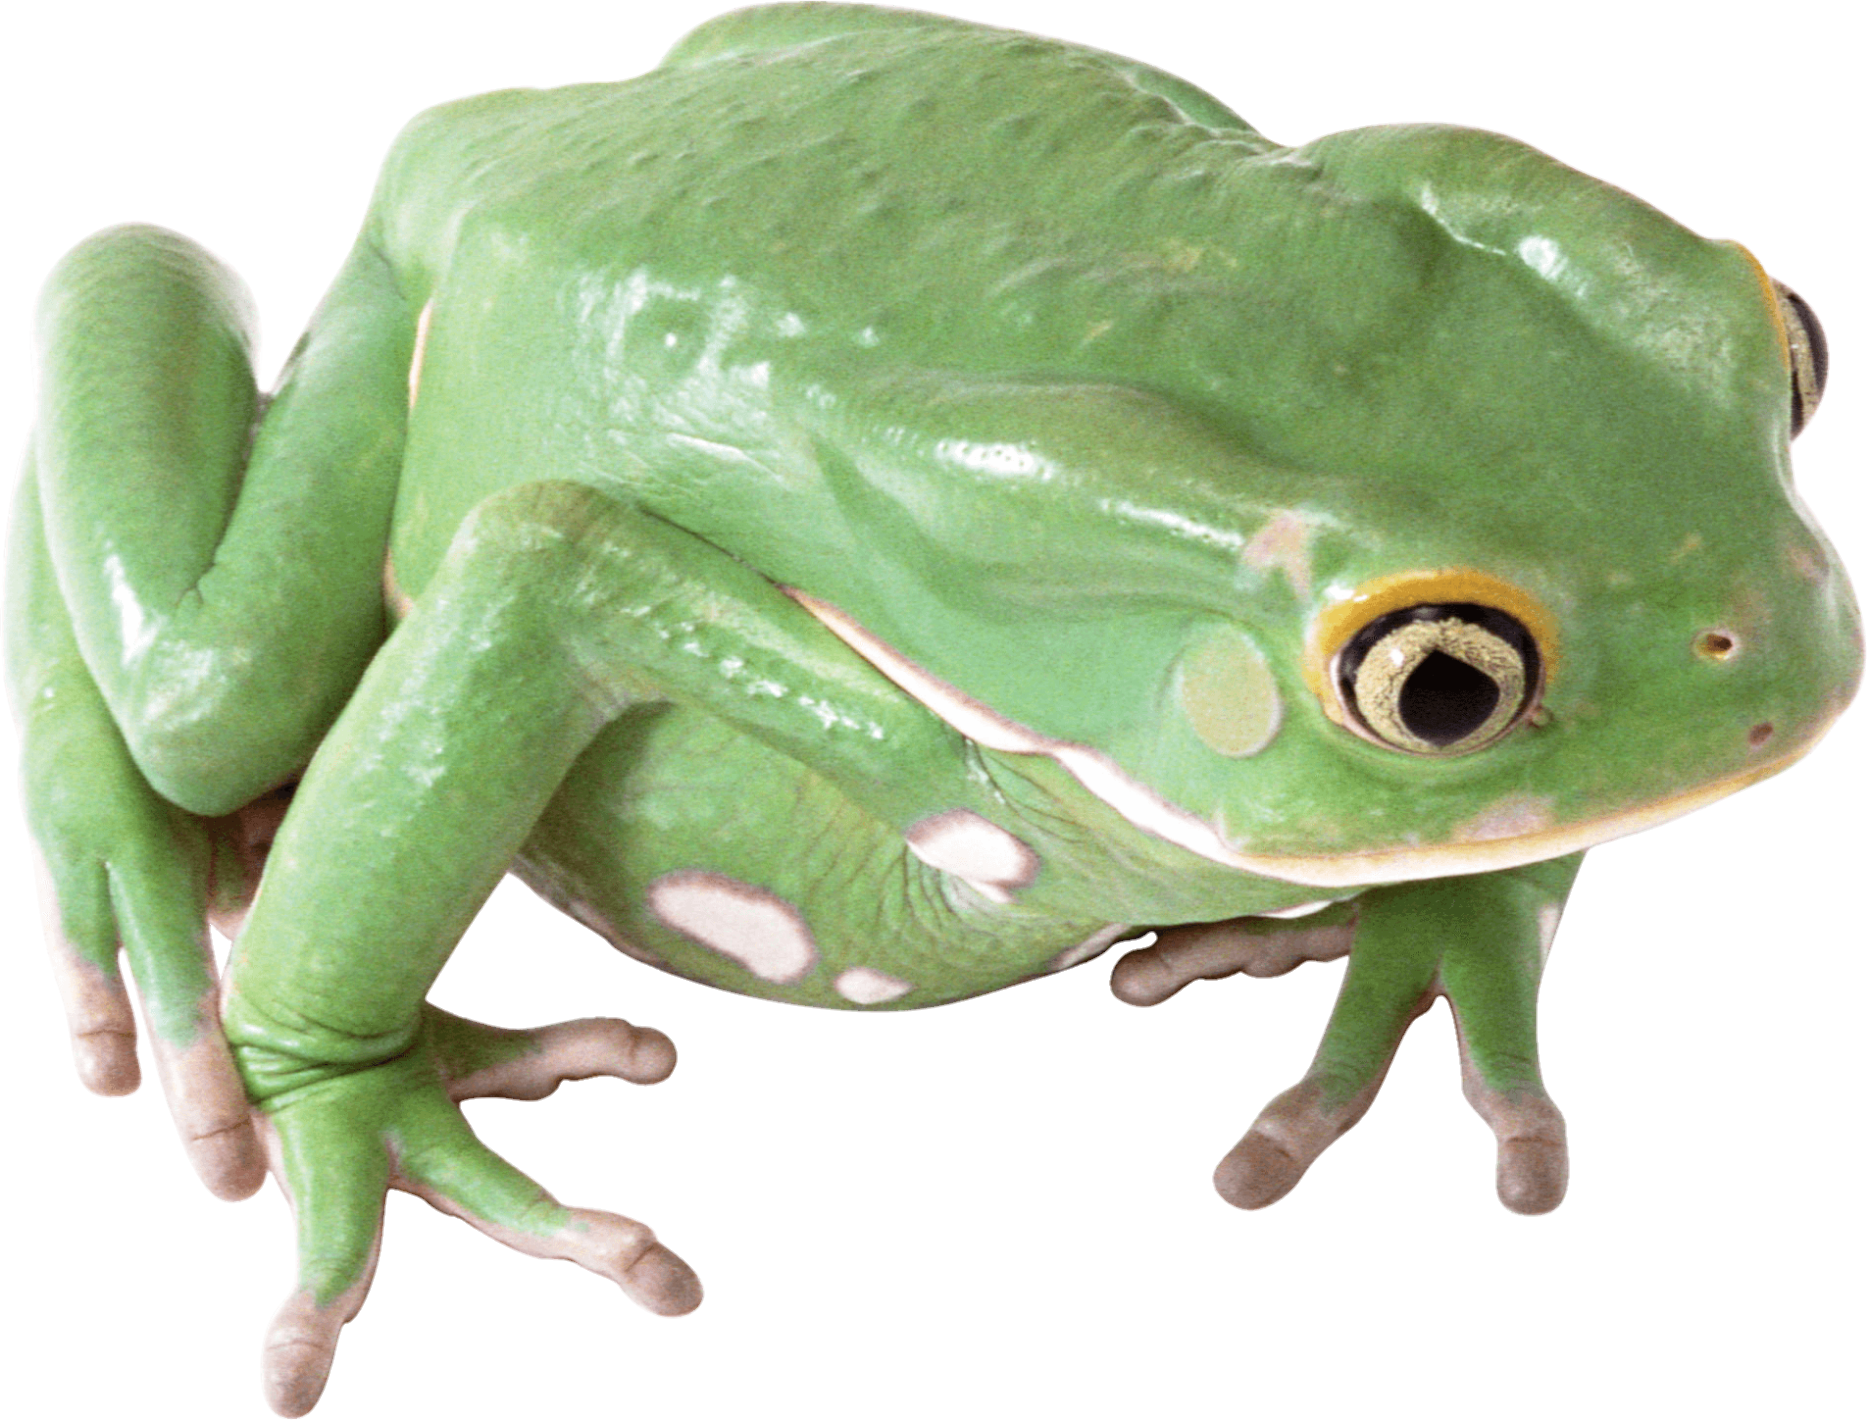 frog-png-image-from-pngfre-2